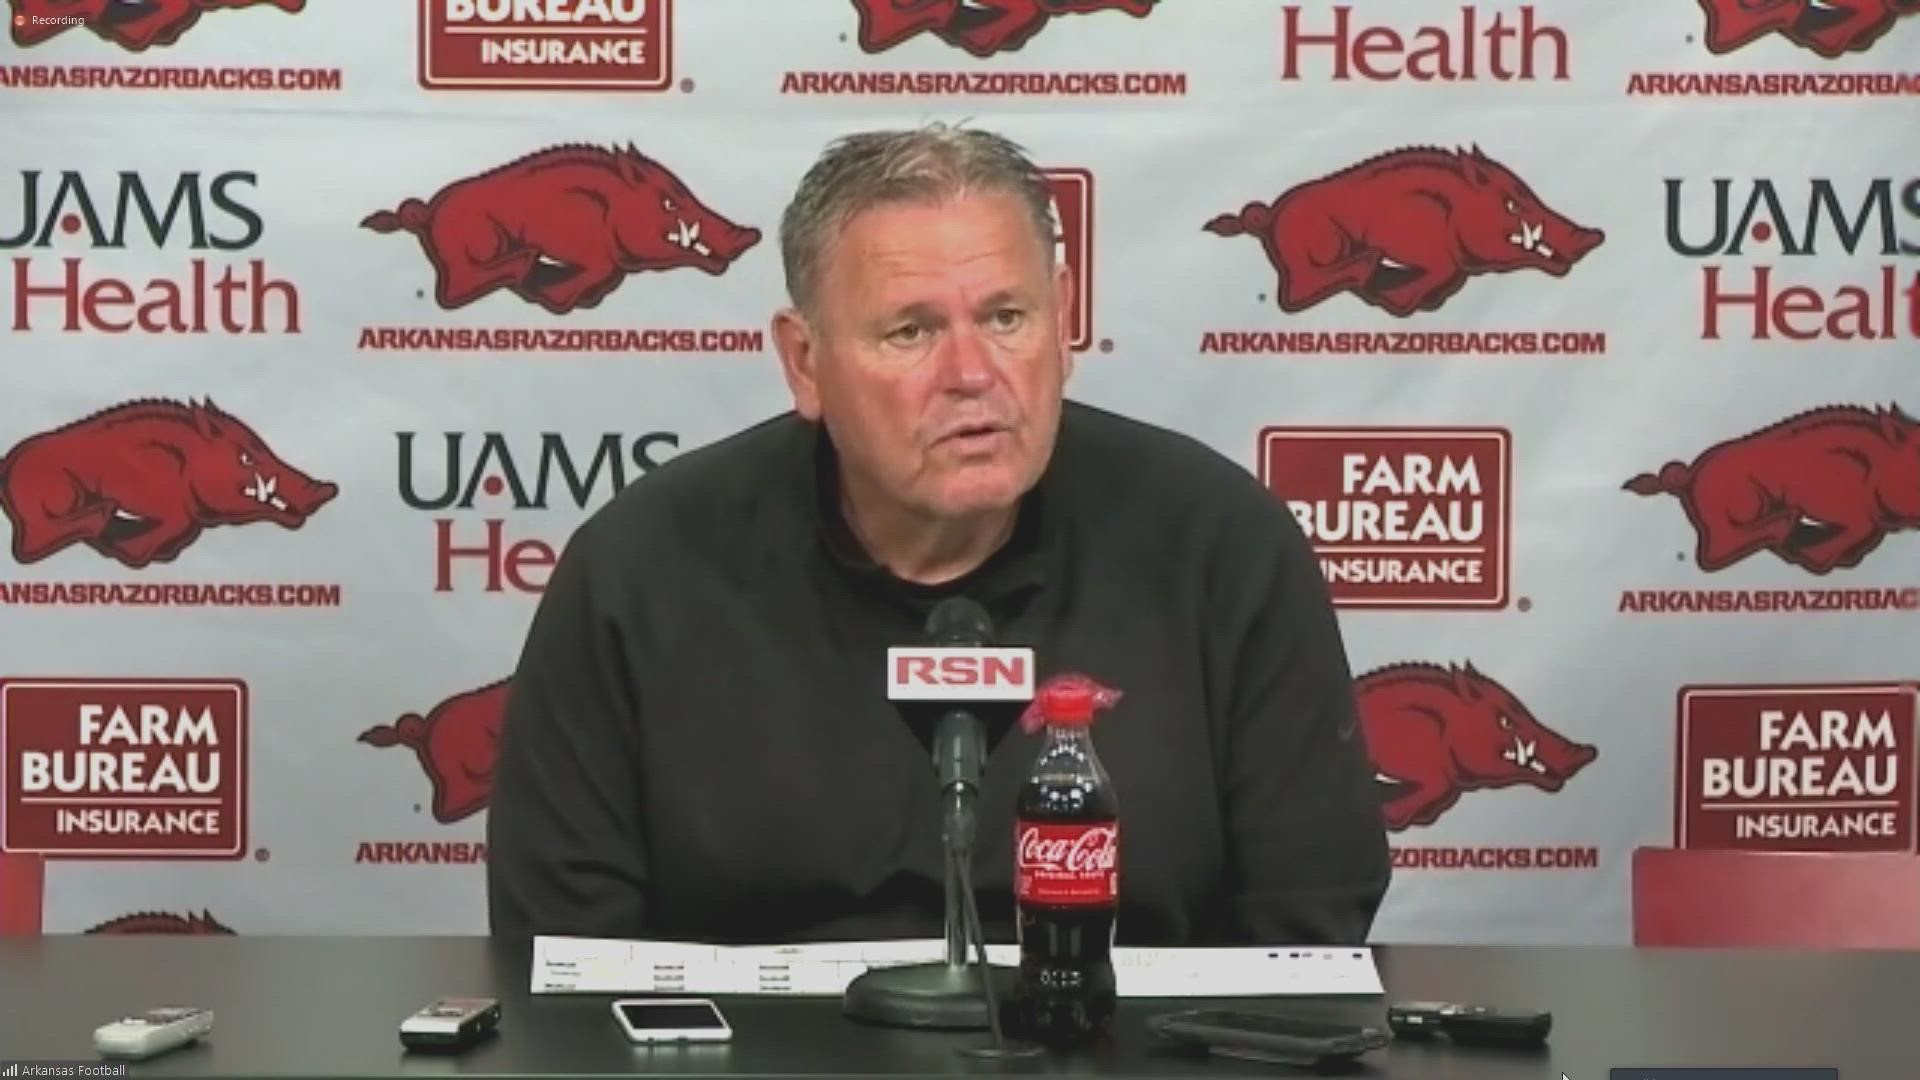 Arkansas coach Sam Pittman said both Slusher and Brown will be suspended for at least one week. Neither will be playing in the game against LSU on Saturday, Nov. 12.